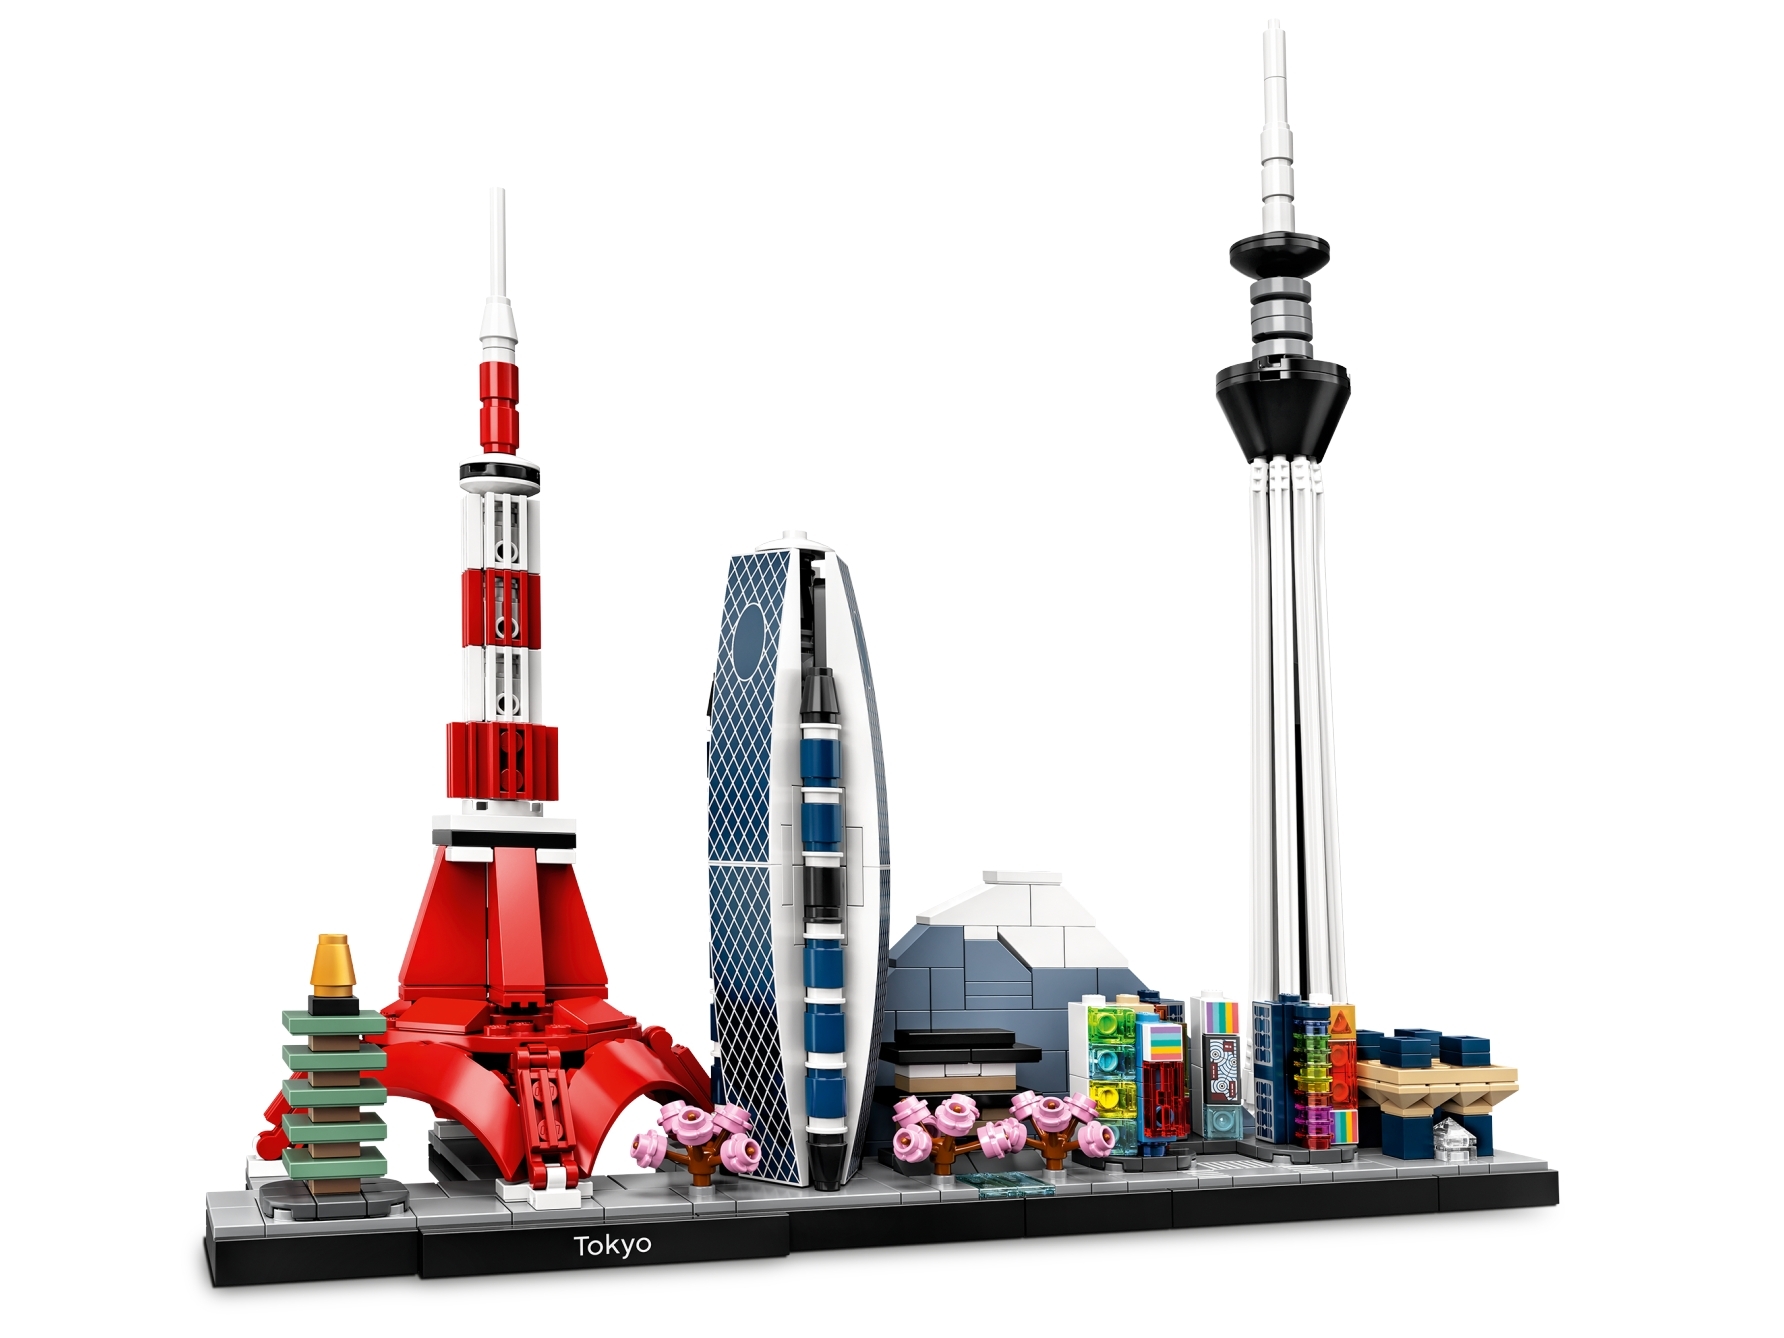 lego for adults architecture